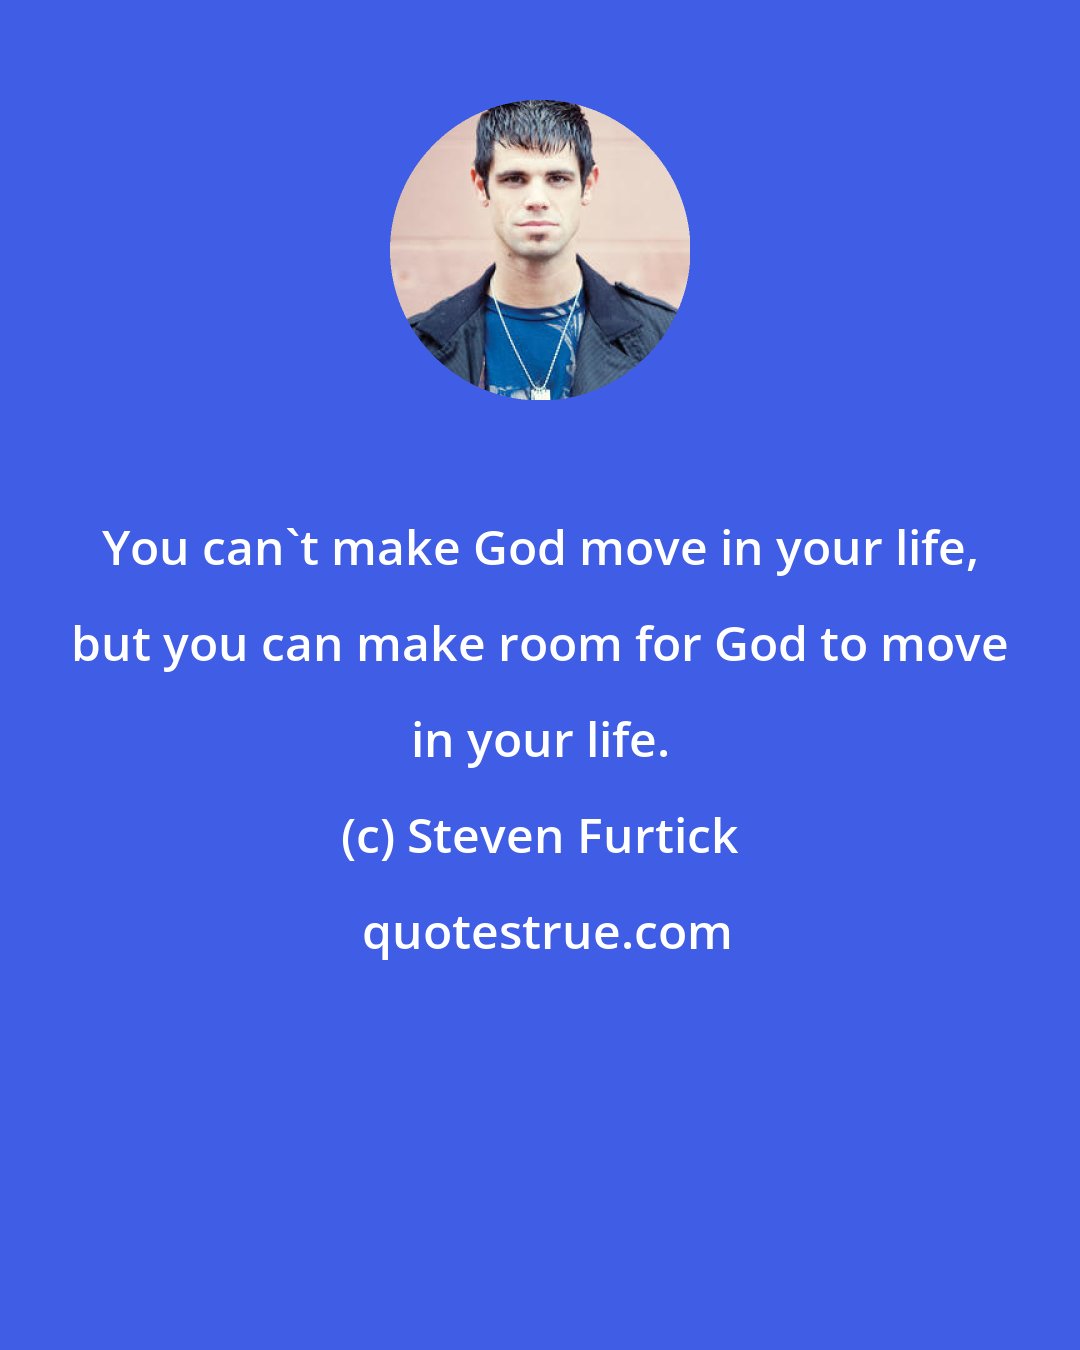 Steven Furtick: You can't make God move in your life, but you can make room for God to move in your life.